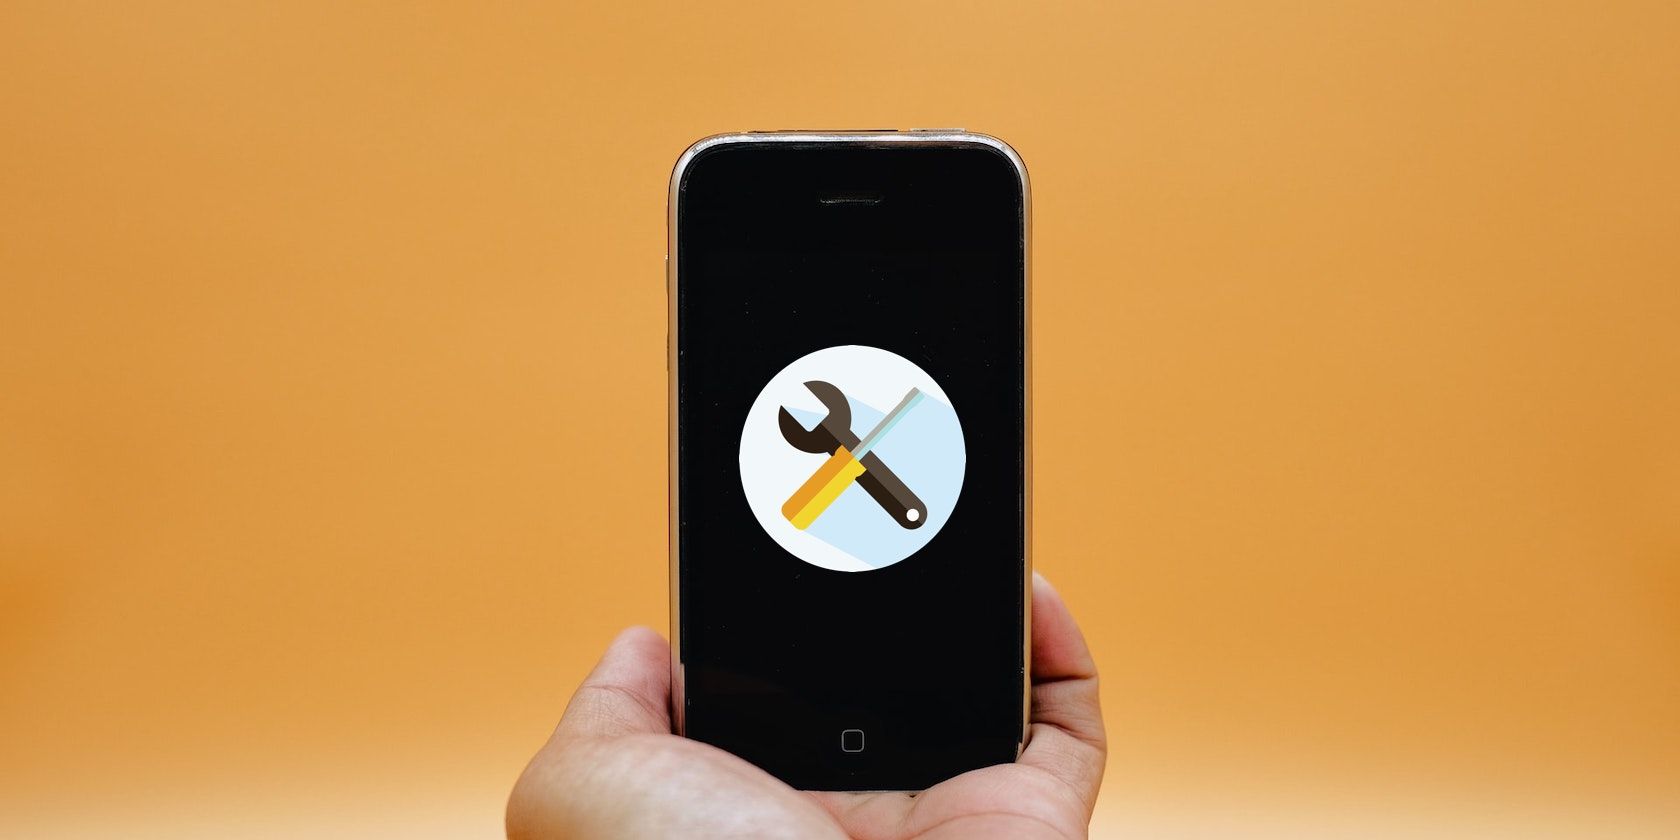 A photo of a hand holding up an iPhone with a repair tool symbol on the screen